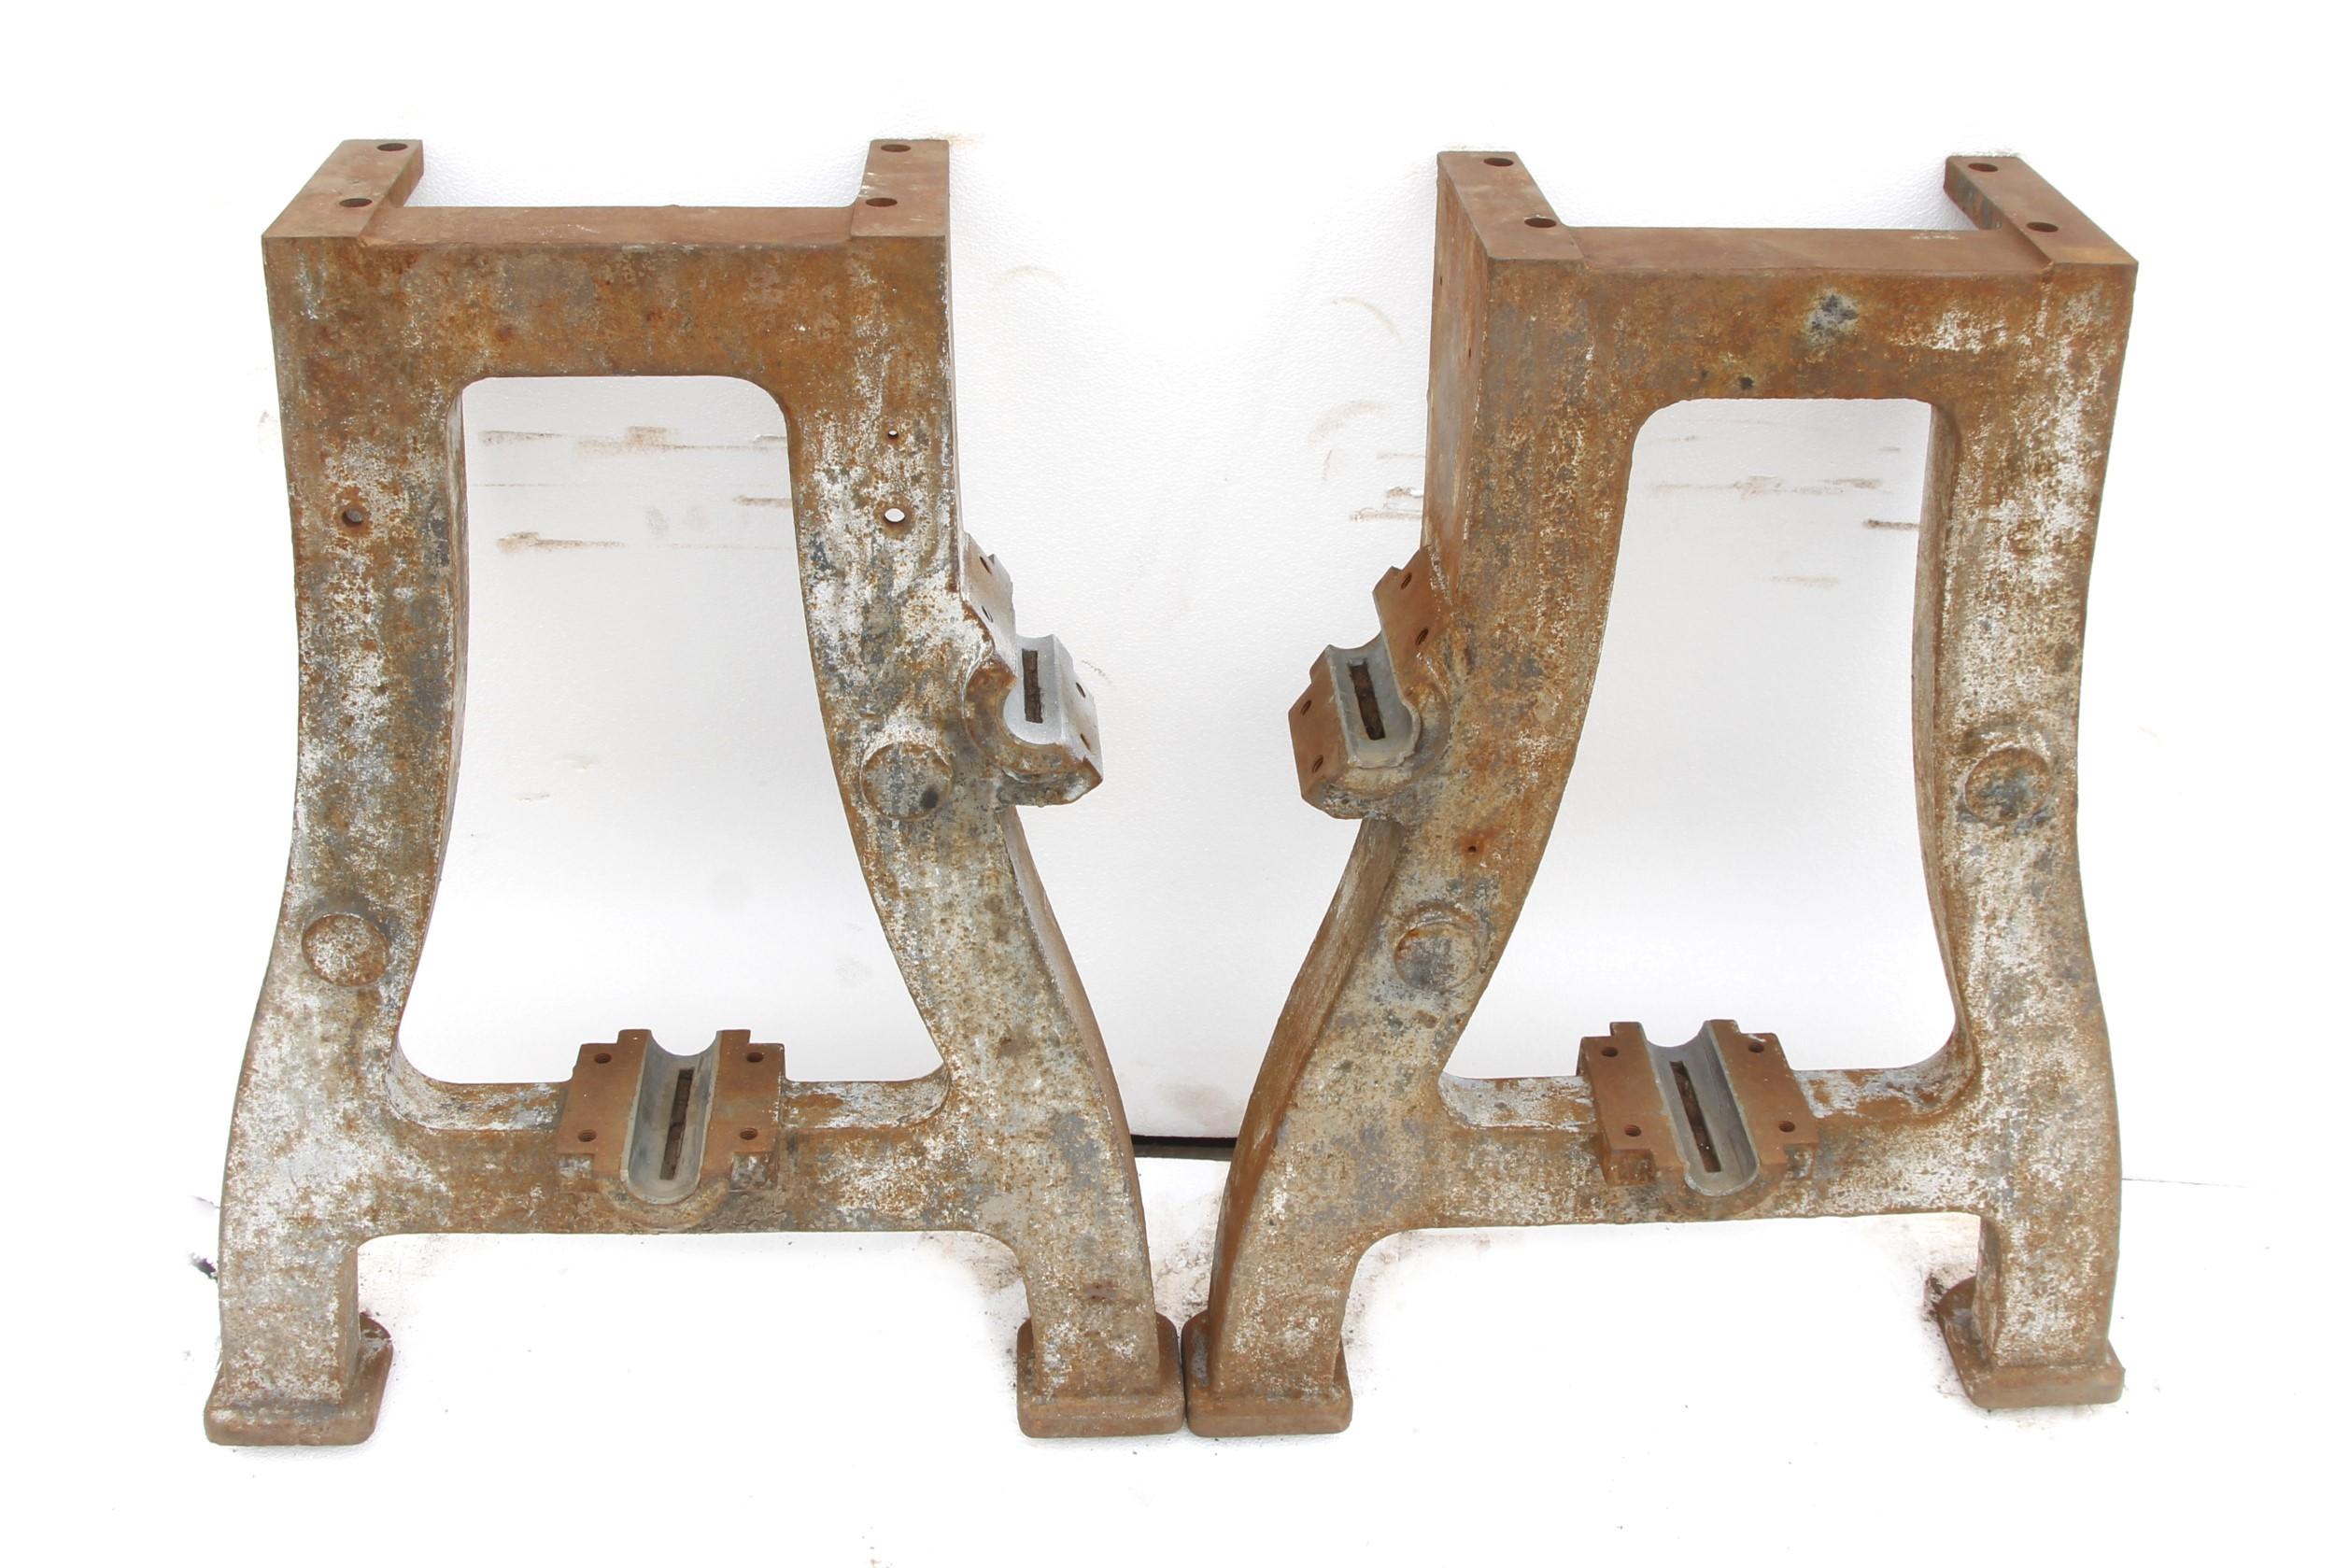 These reclaimed industrial cast iron legs are original to early 1900's heavy machinery.  The surface has a rustic look due to years of weathering but can also be restored to a more polished look if preferred.  Priced as a pair.  This can be seen at